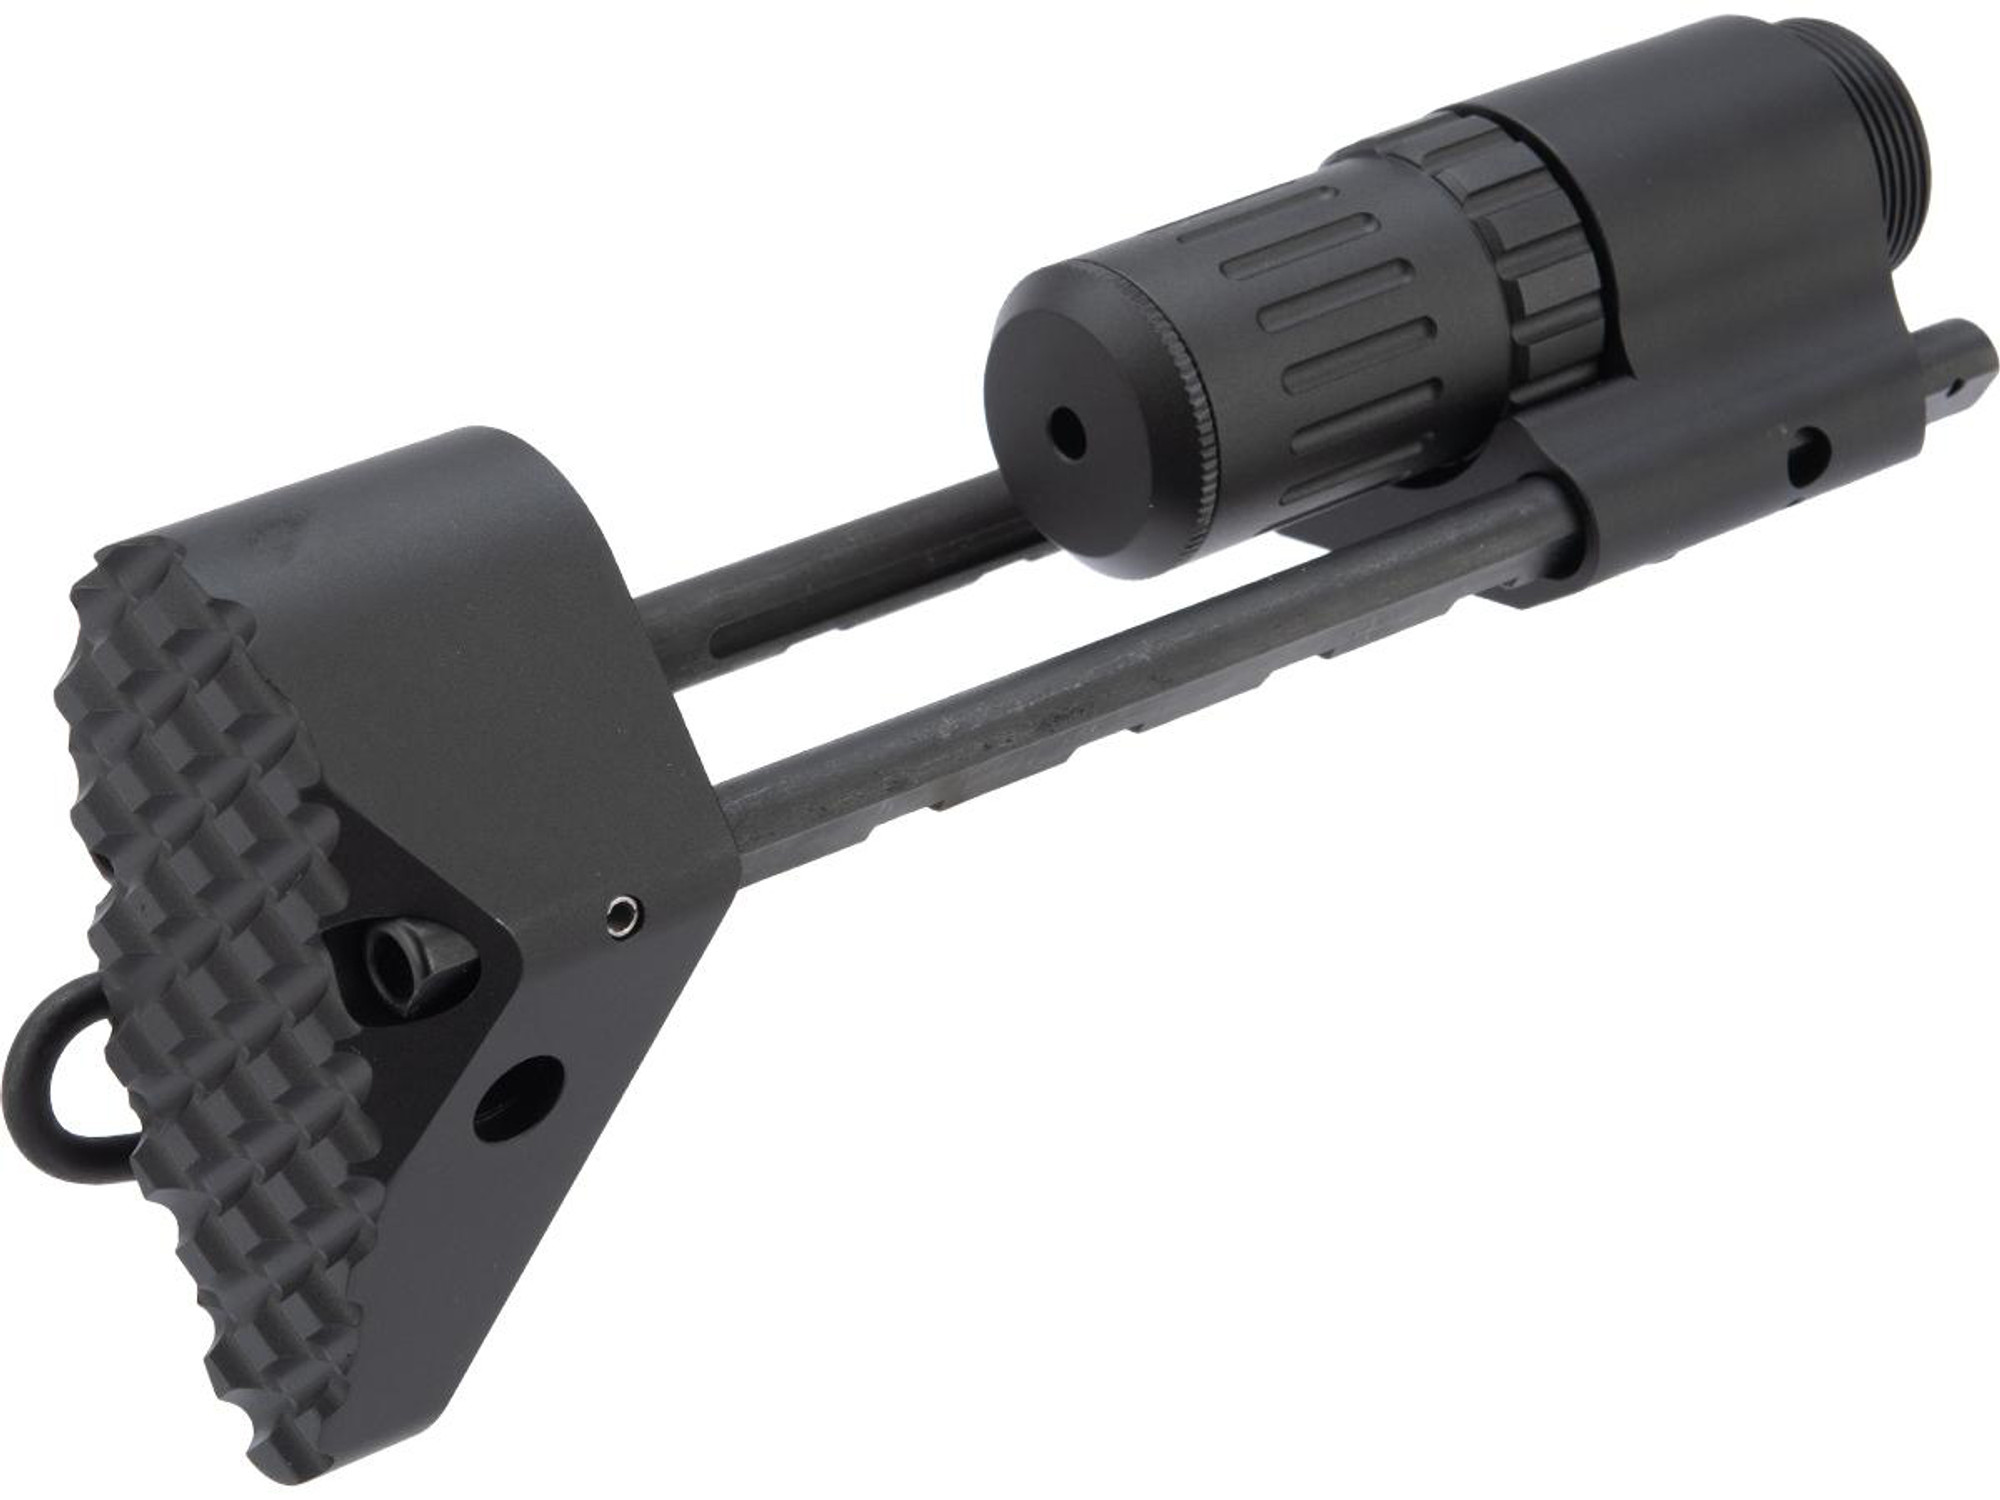 EMG Troy Industries PDW Stock for TM M4A1 MWS Gas Blowback Rifles